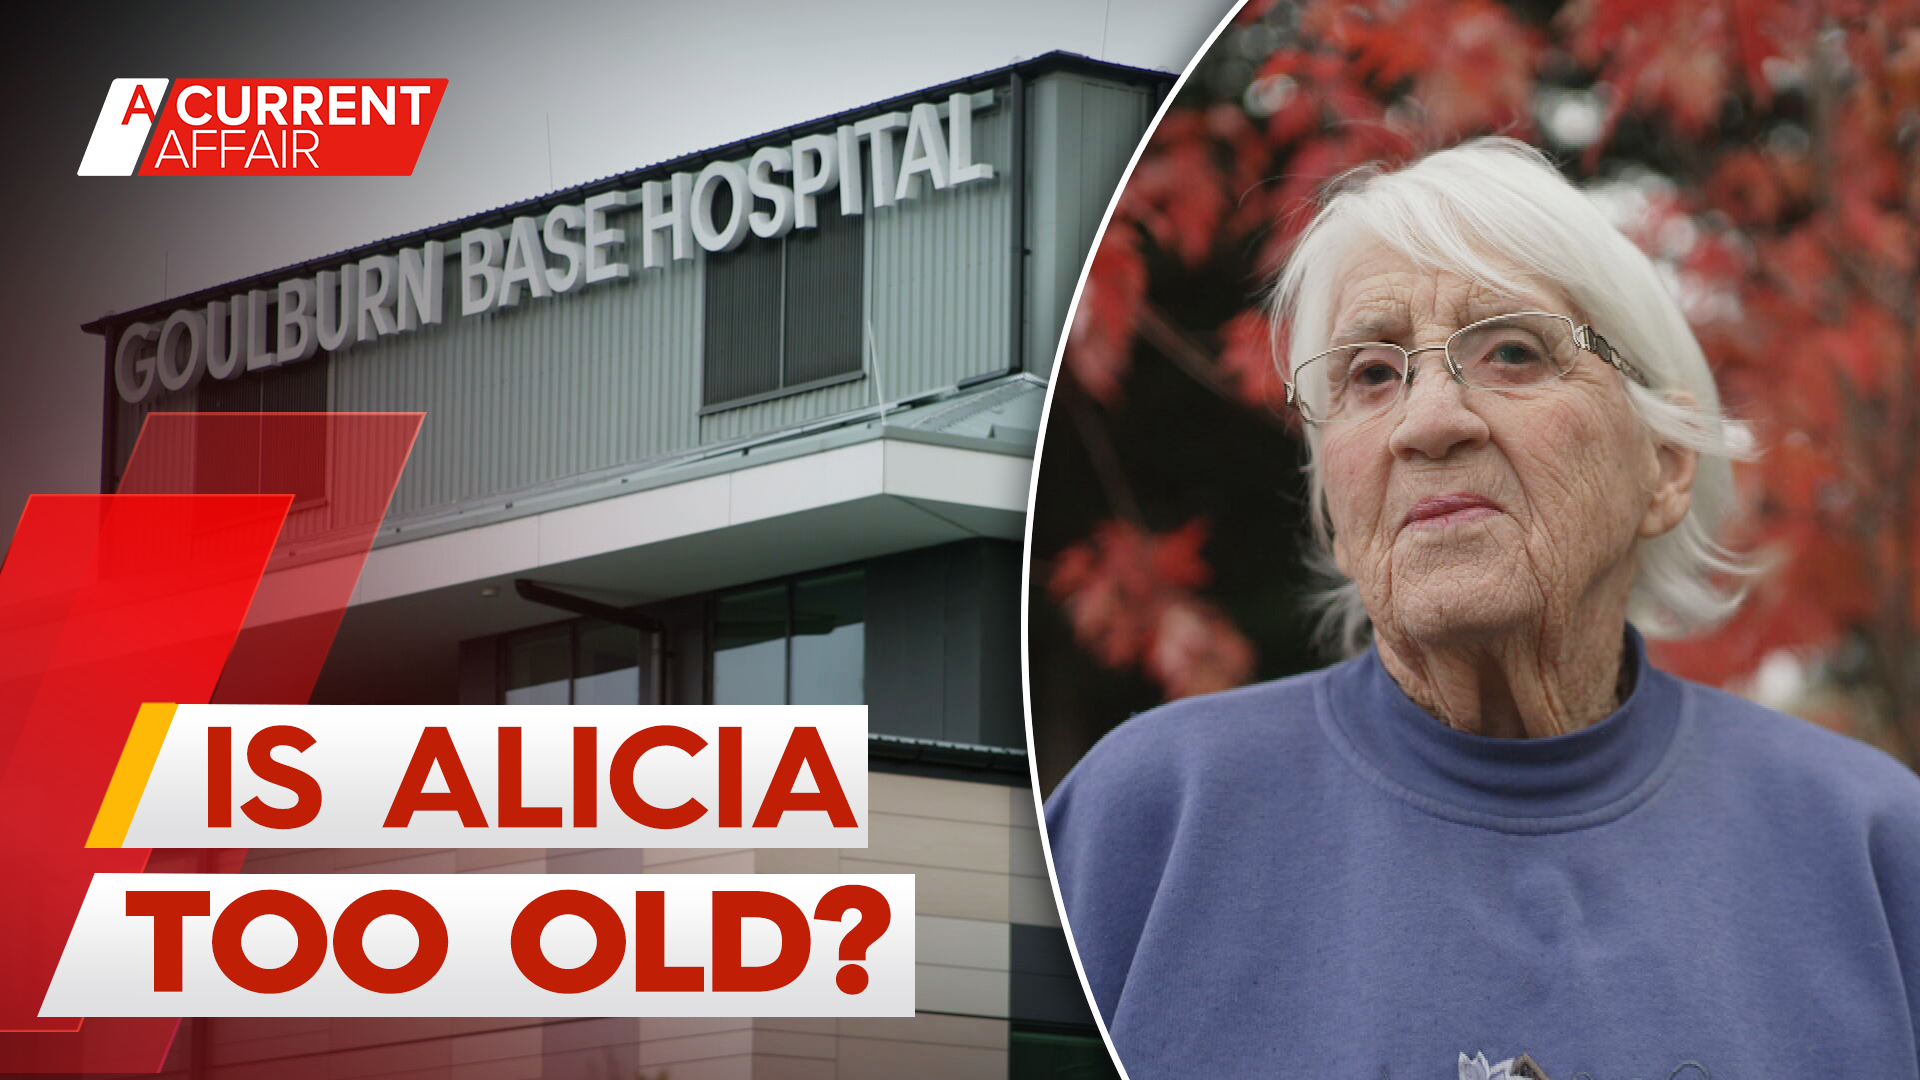 Great-grandmother claims she was refused surgery for being 'too old'